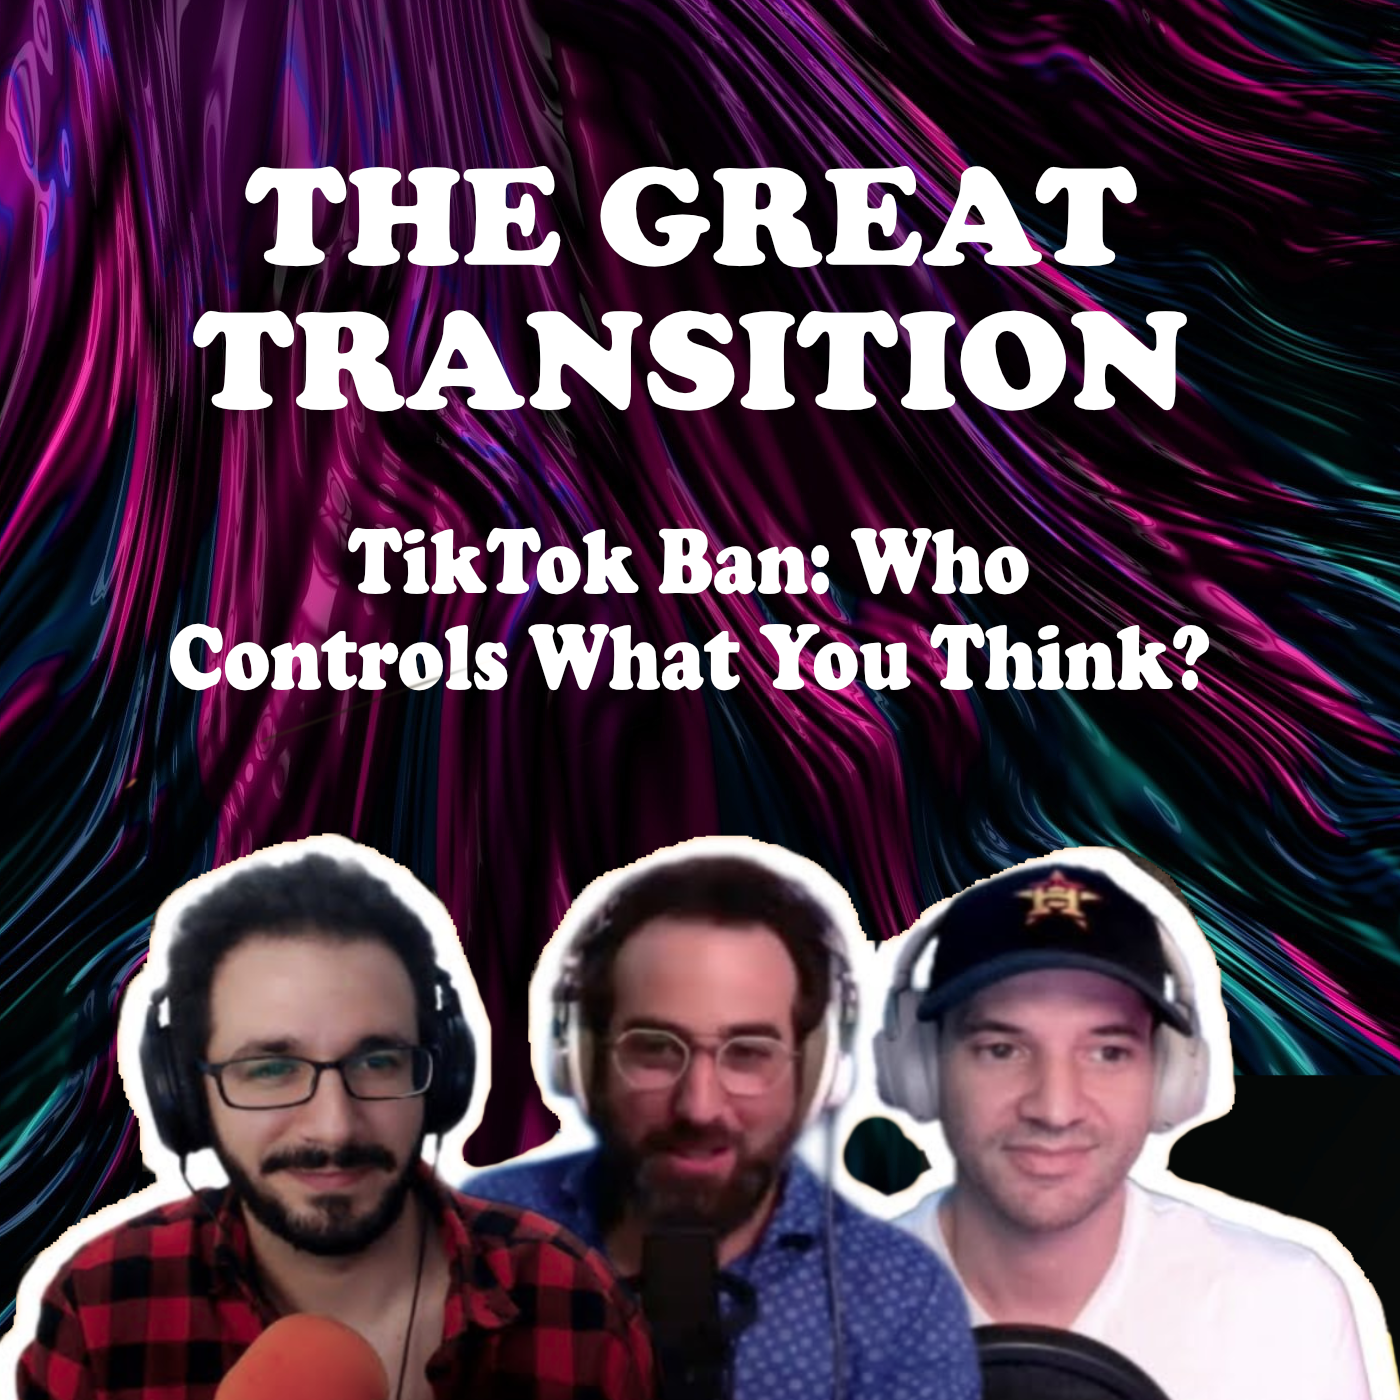 The Great Transition - TikTok Ban: Who Controls What You Think?